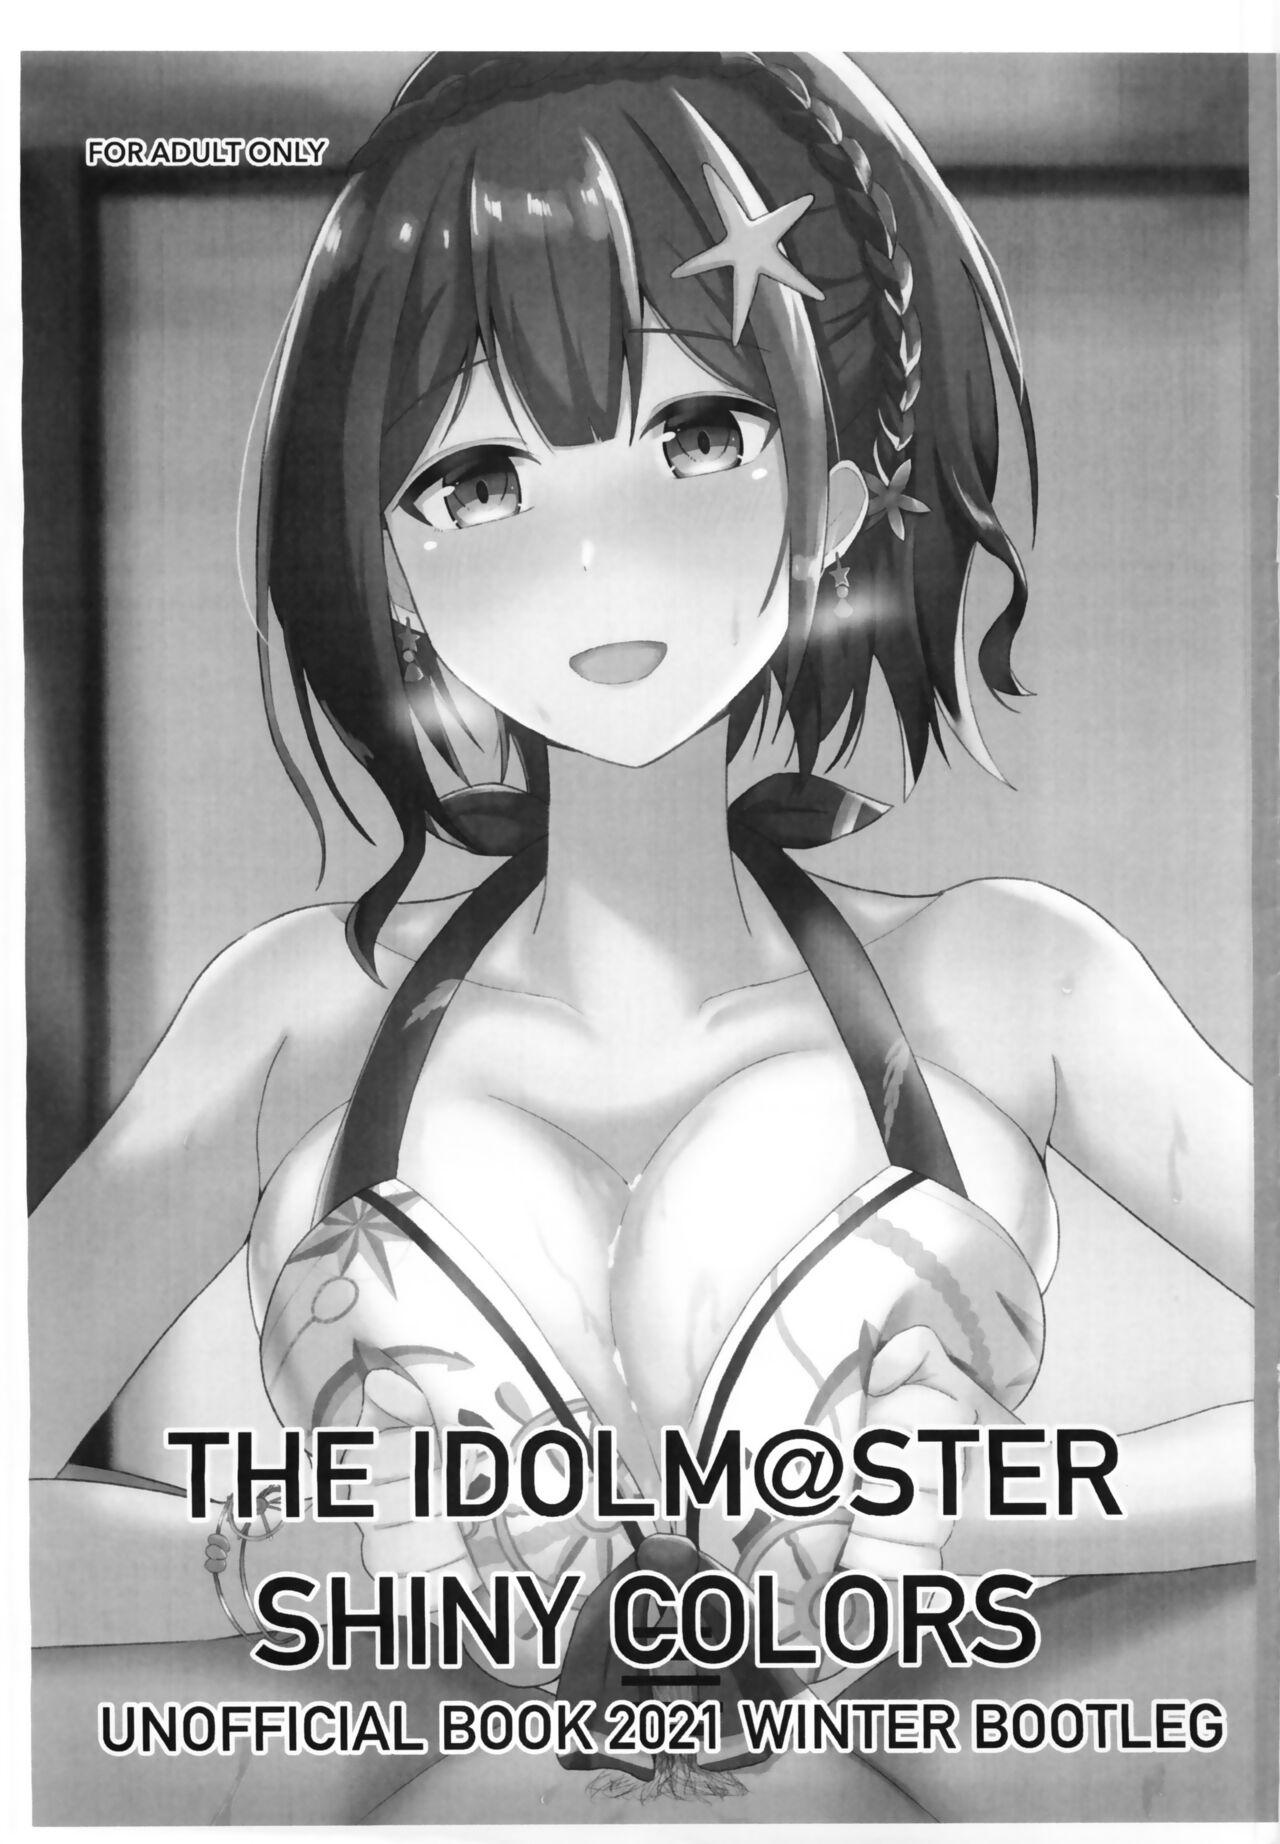 Big Penis UNOFFICIAL BOOK 2021 WINTER BOOTLEG - The idolmaster Doggy Style Porn - Page 1